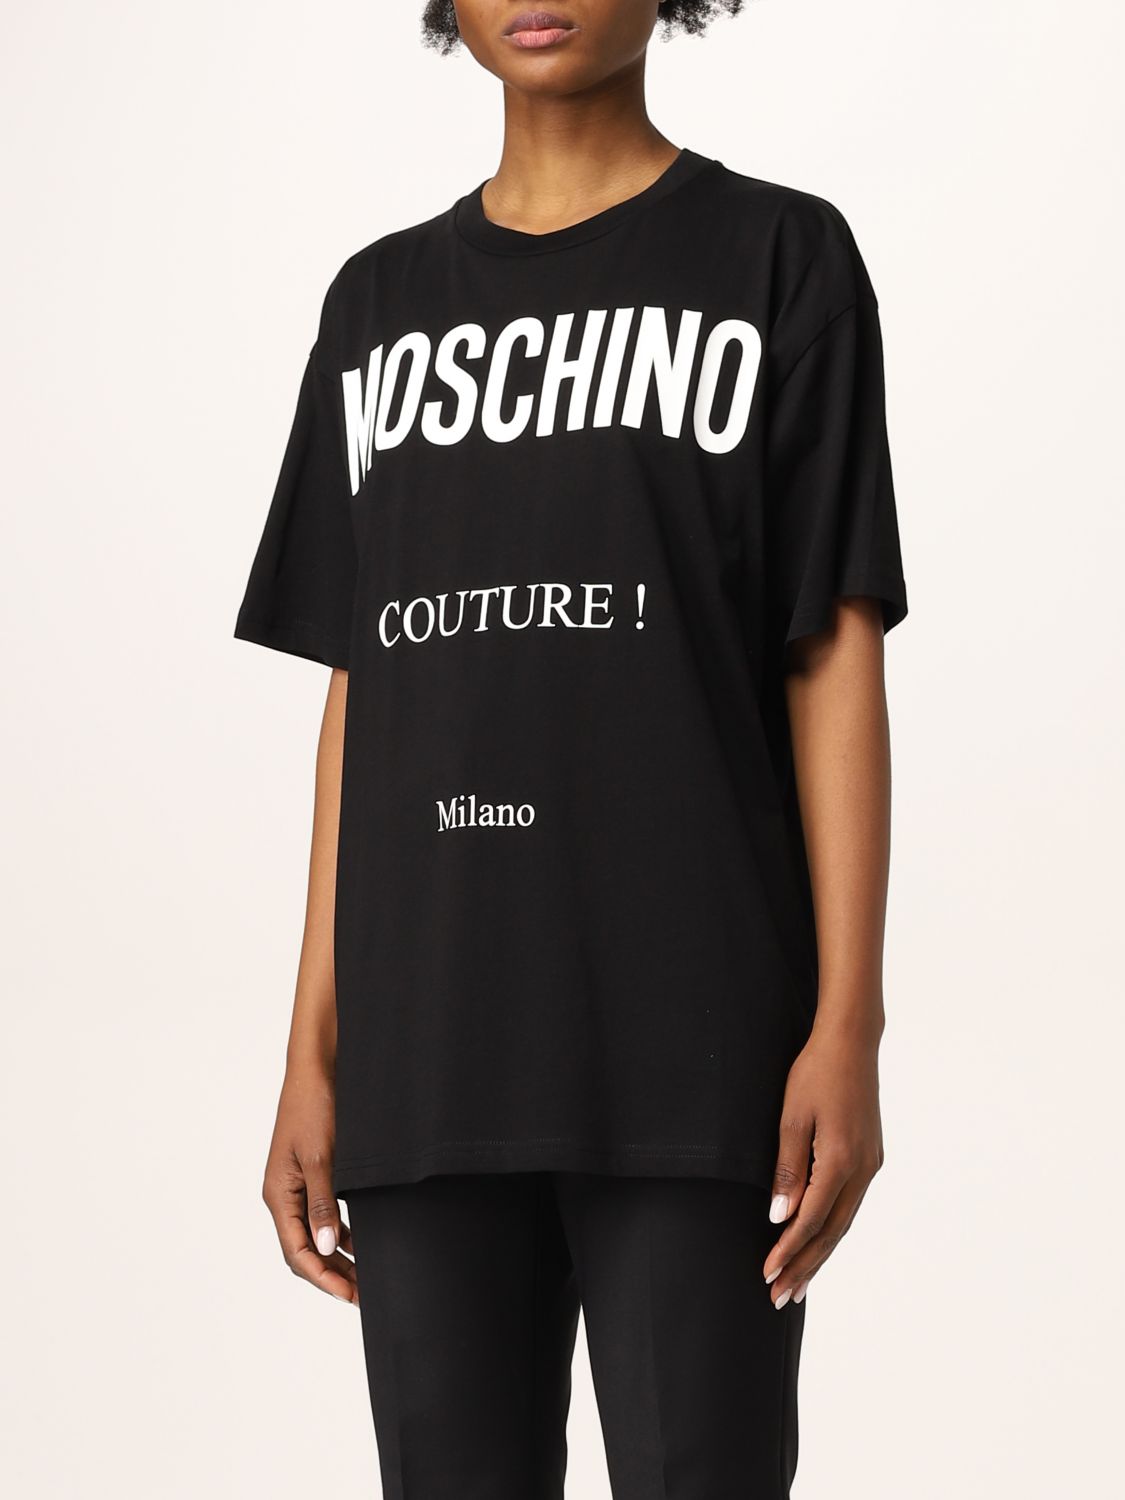 MOSCHINO COUTURE: cotton t-shirt with logo - Black | Moschino Couture t ...